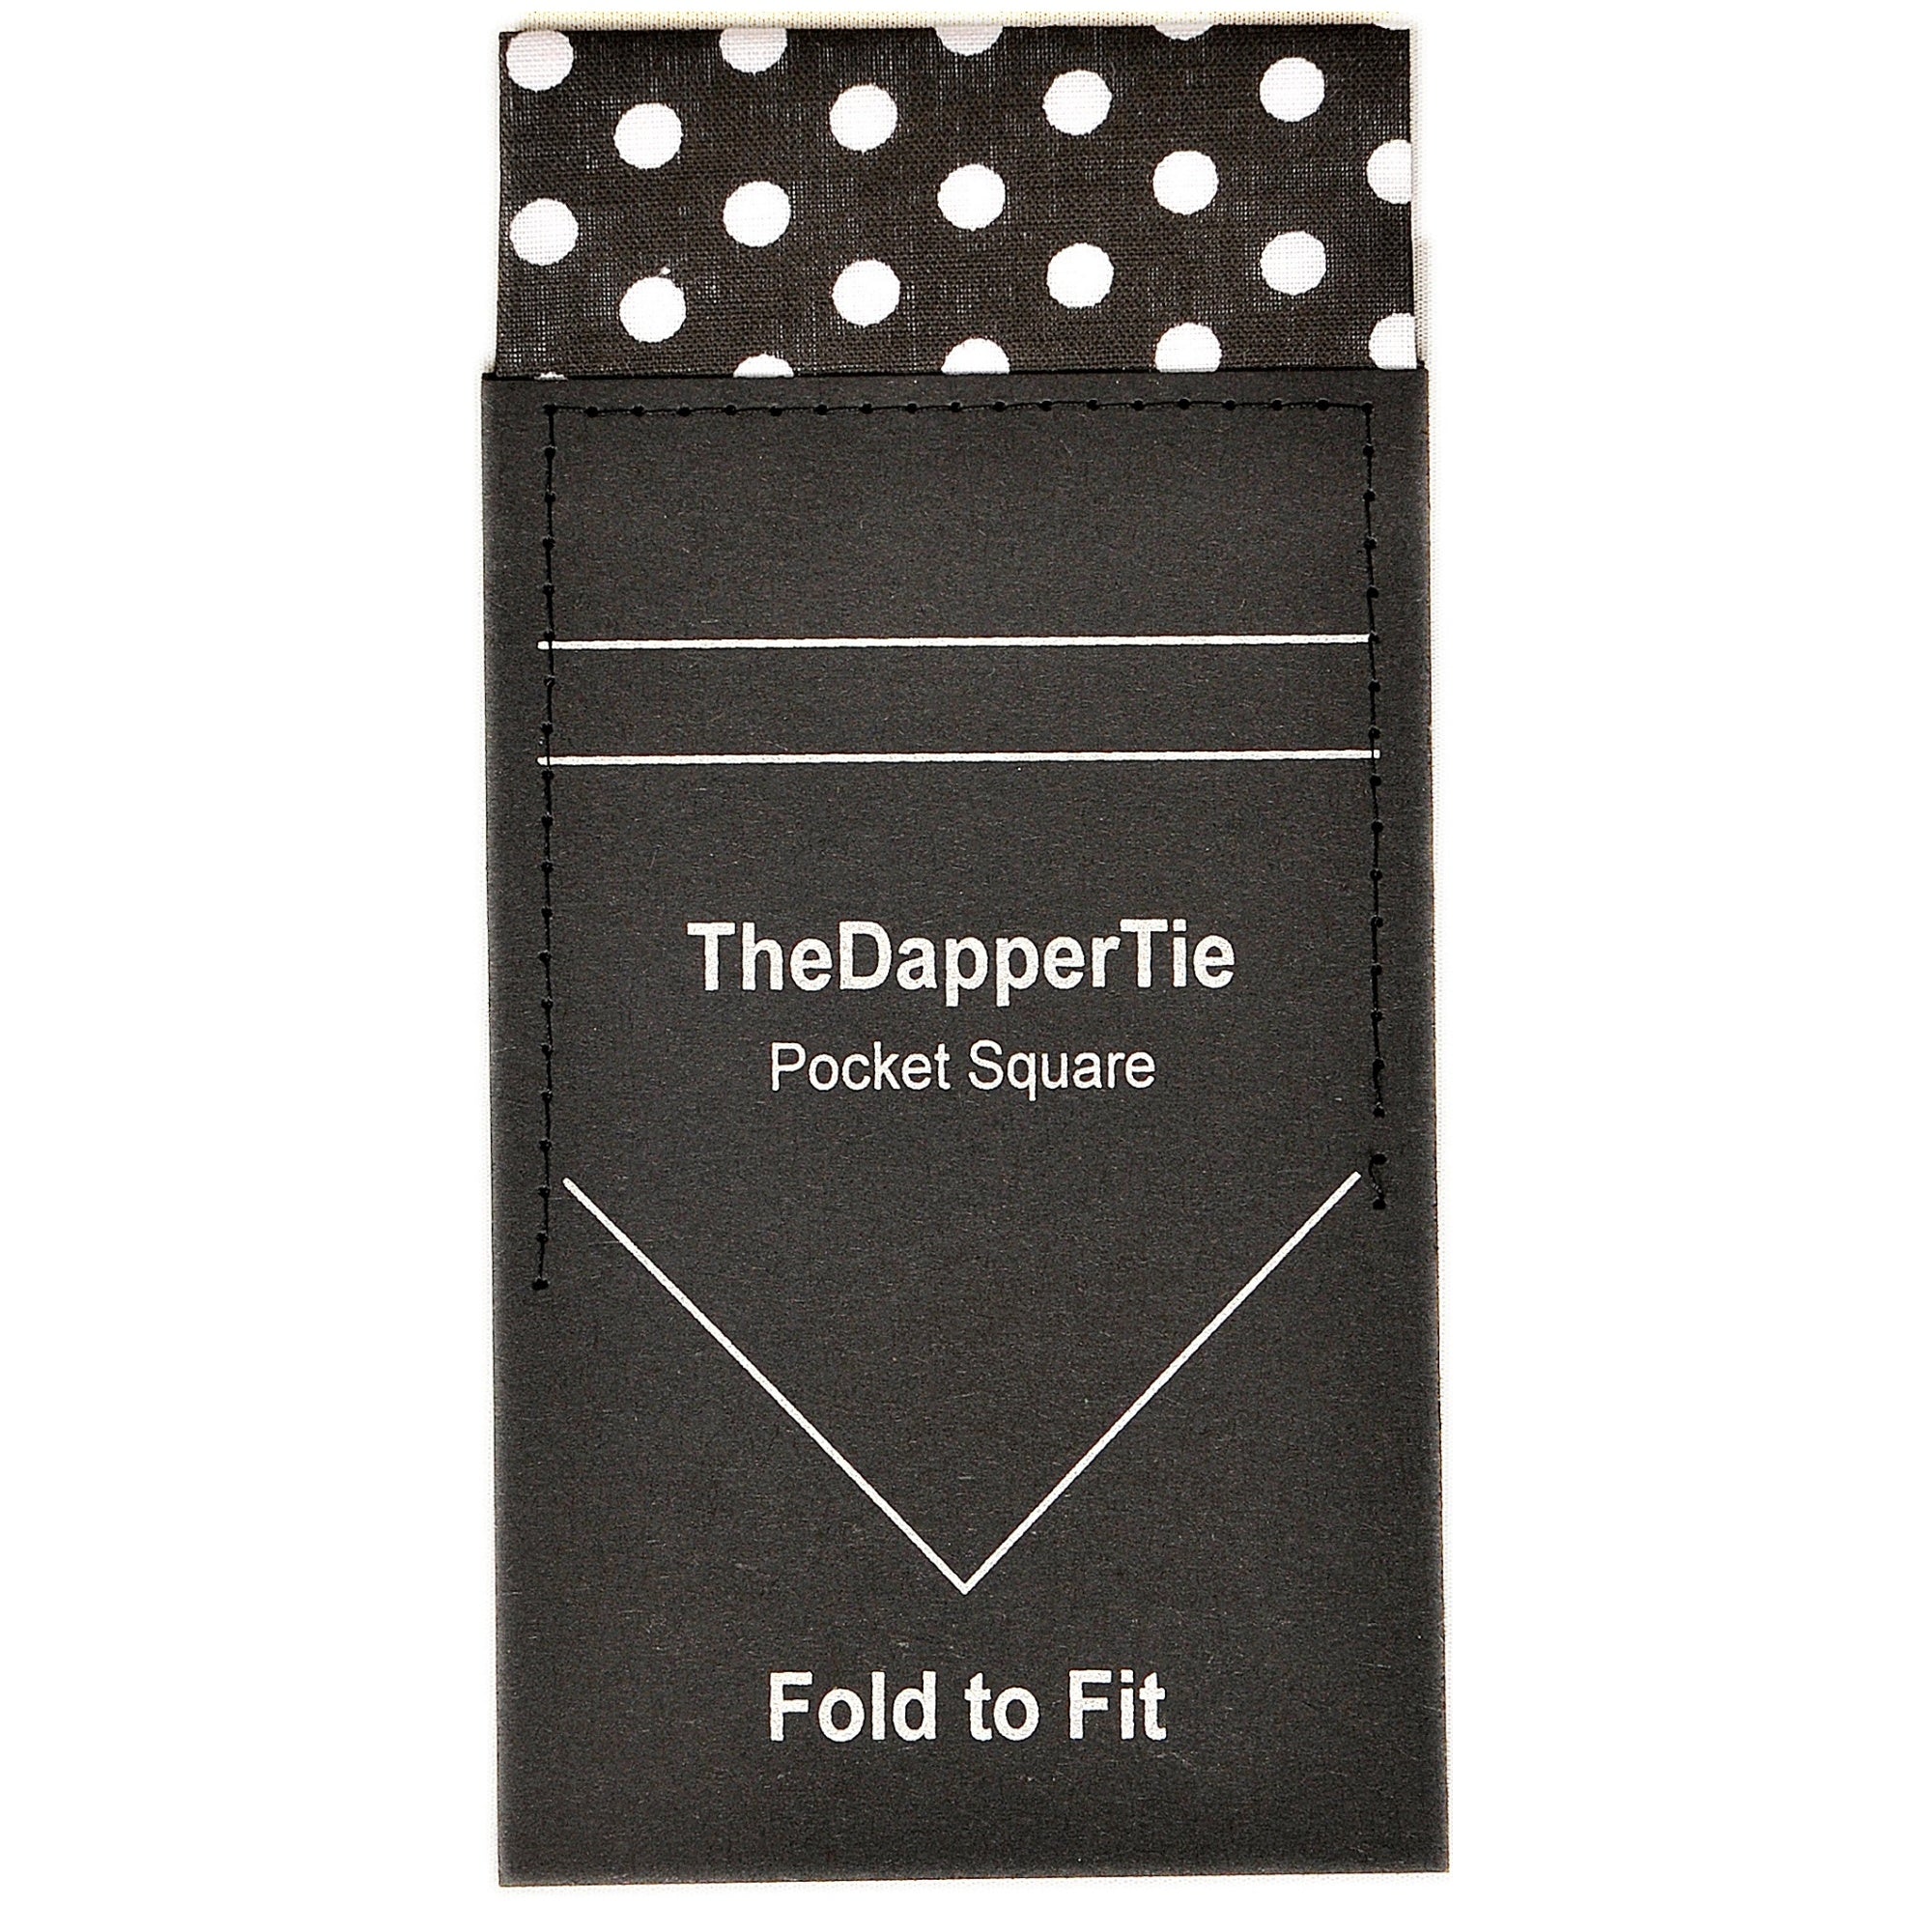 New Men's Polka Dots Flat Pre Folded Pocket Square on Card - TheDapperTie Prefolded Pocket Squares TheDapperTie Black & White  